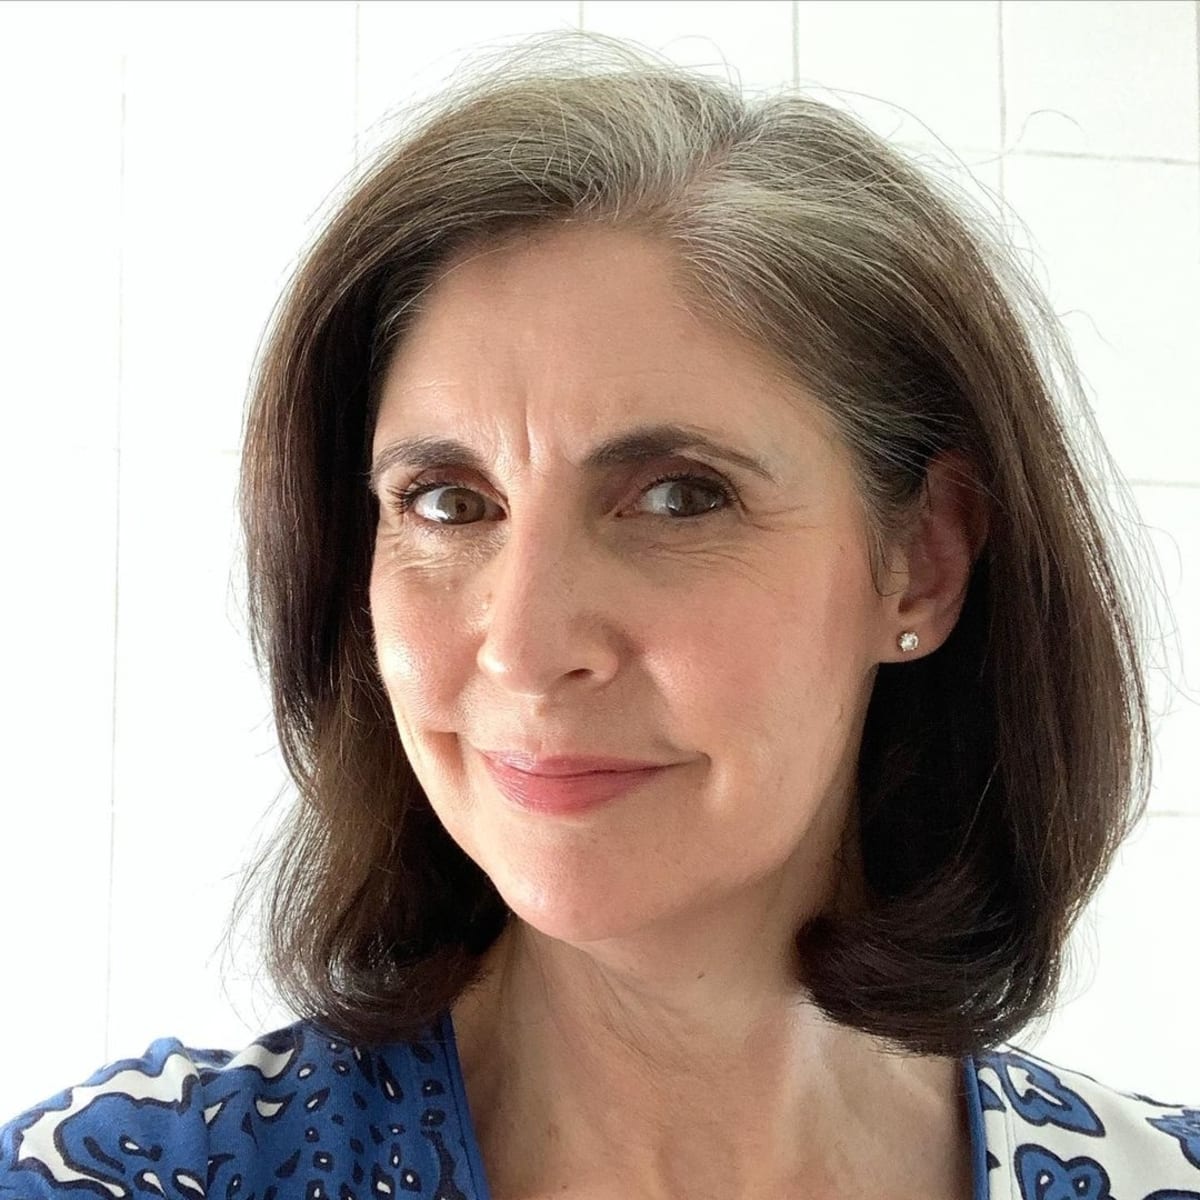 The long bob for a woman over 50 with a round face